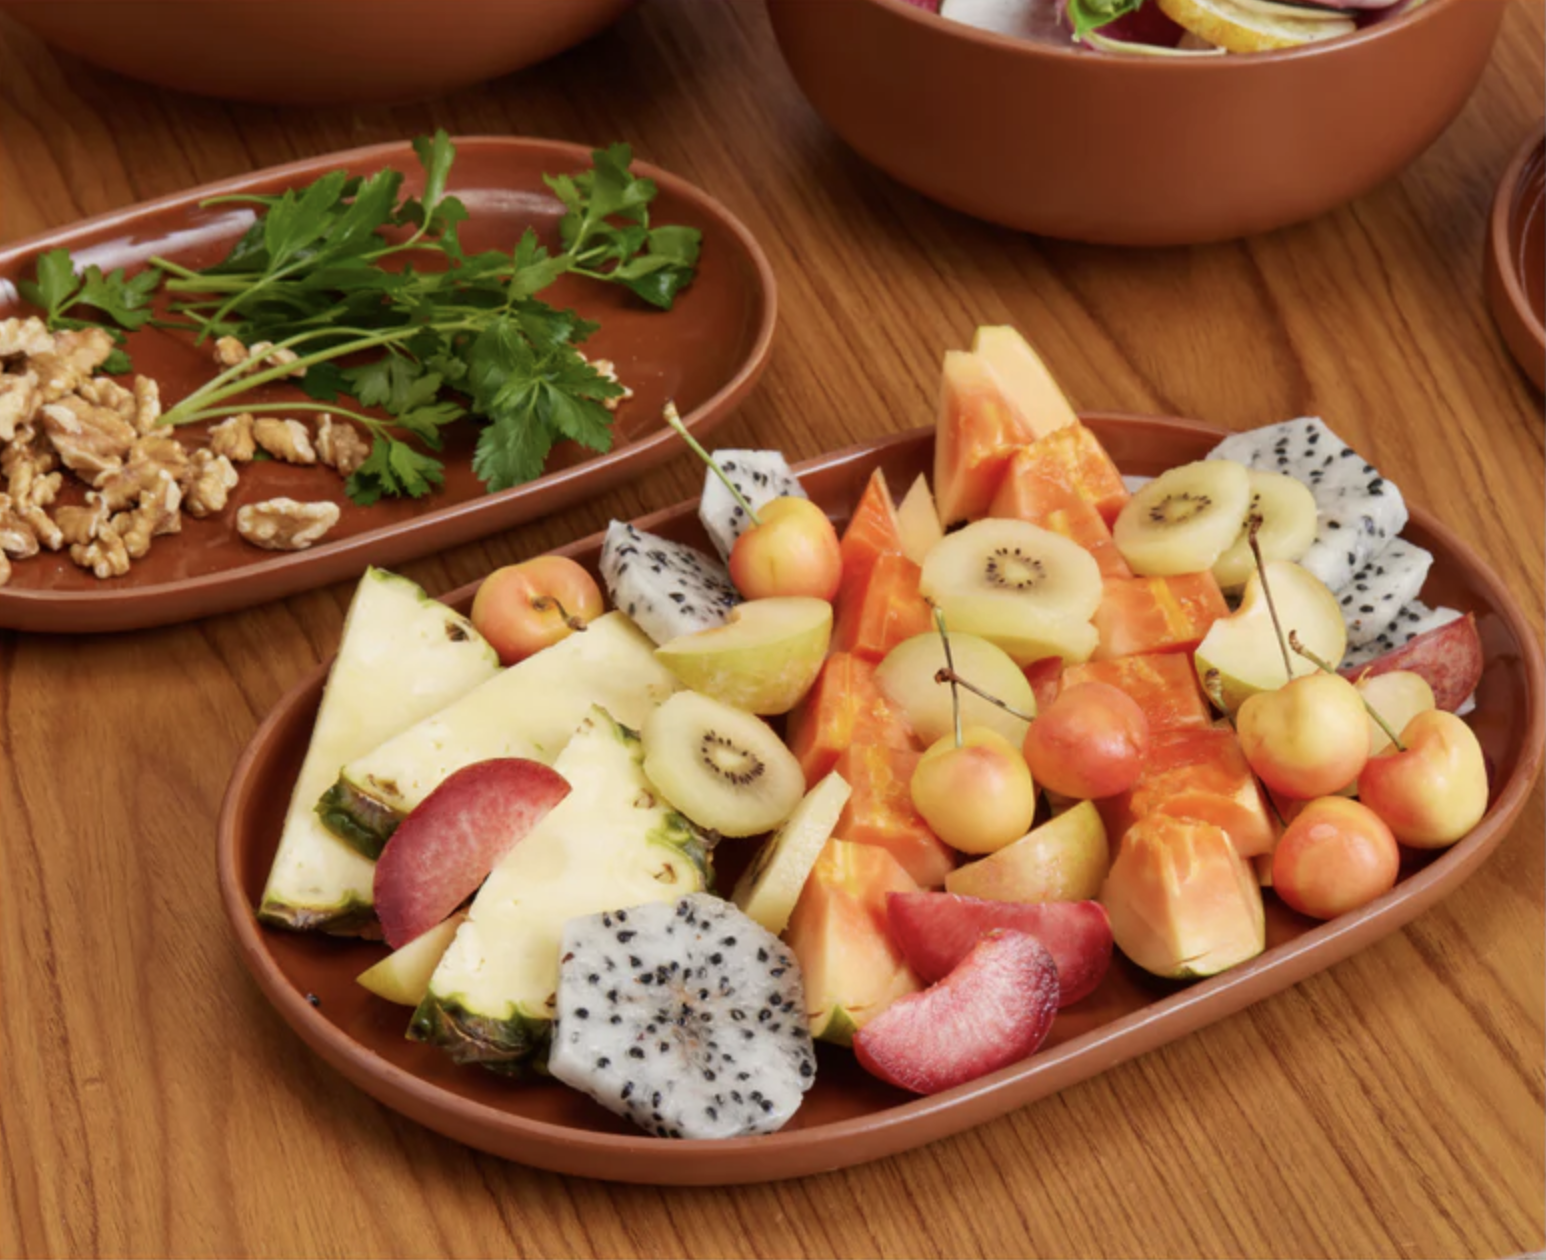 Fruit and garnishes on the two platters